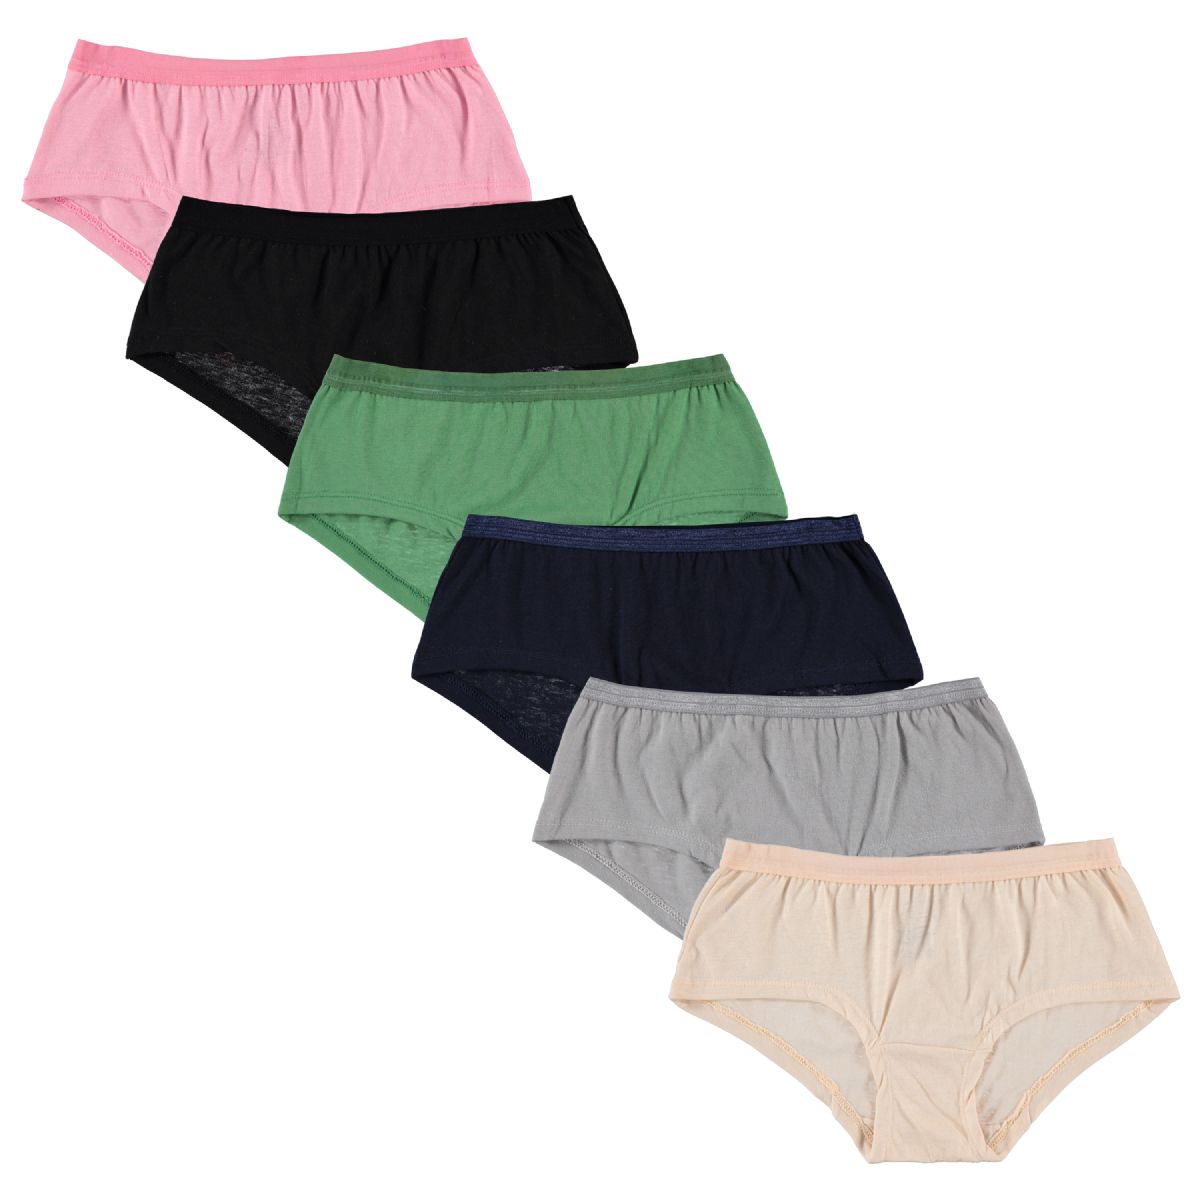 36 Wholesale Yacht & Smith Womens Cotton Lycra Underwear, Panty Briefs, 95%  Cotton Soft Assorted Colors, Size Small